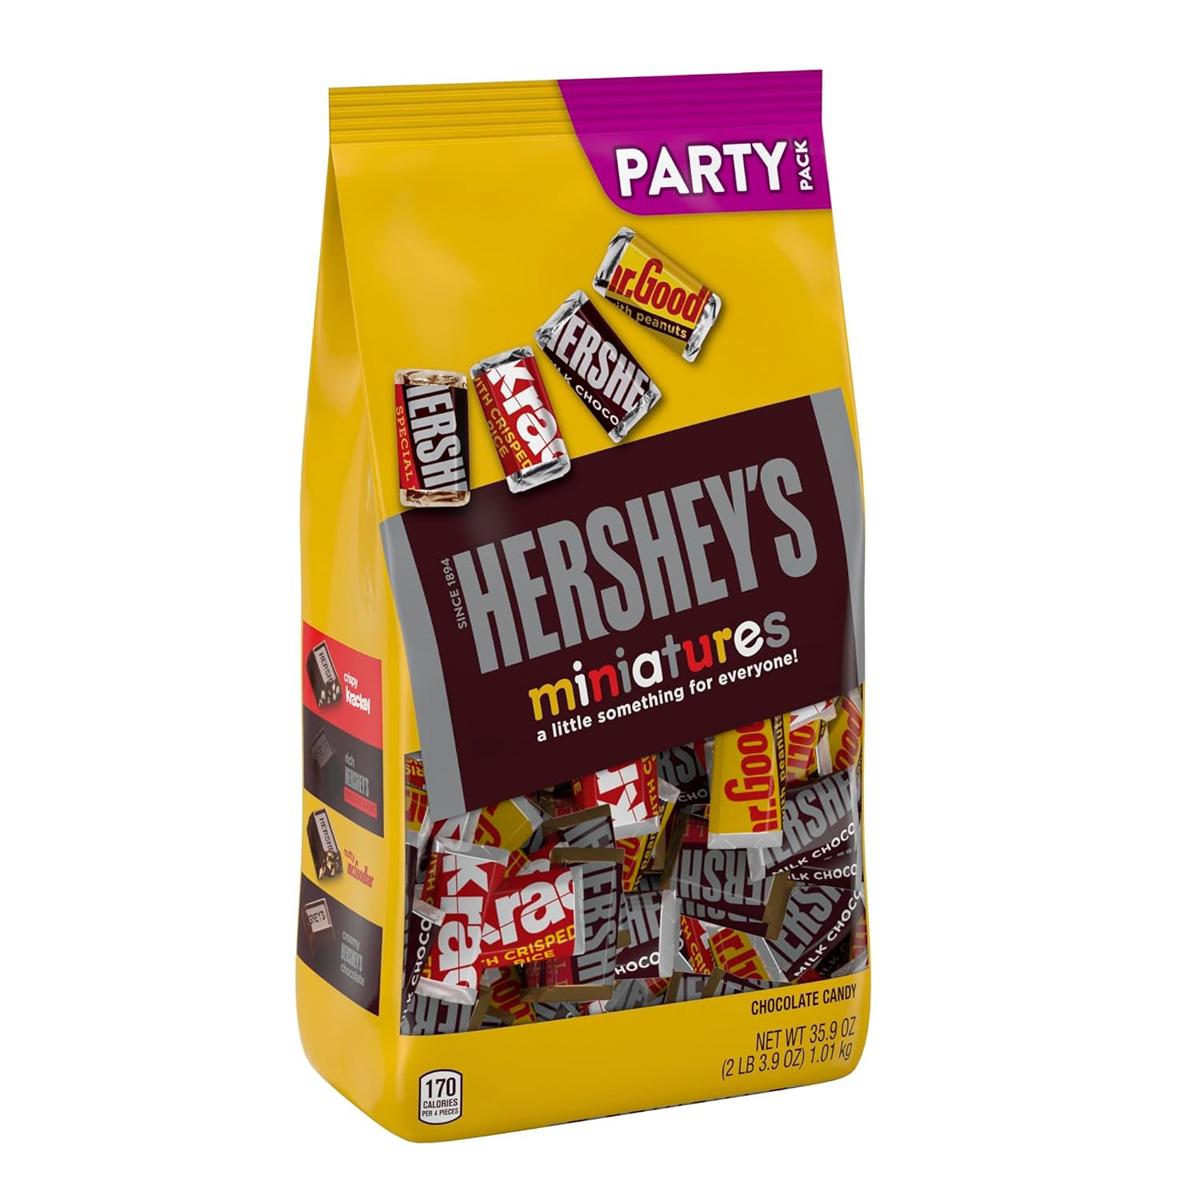 Hersheys Miniatures Assorted Chocolate Candy Party Pack for $9.68